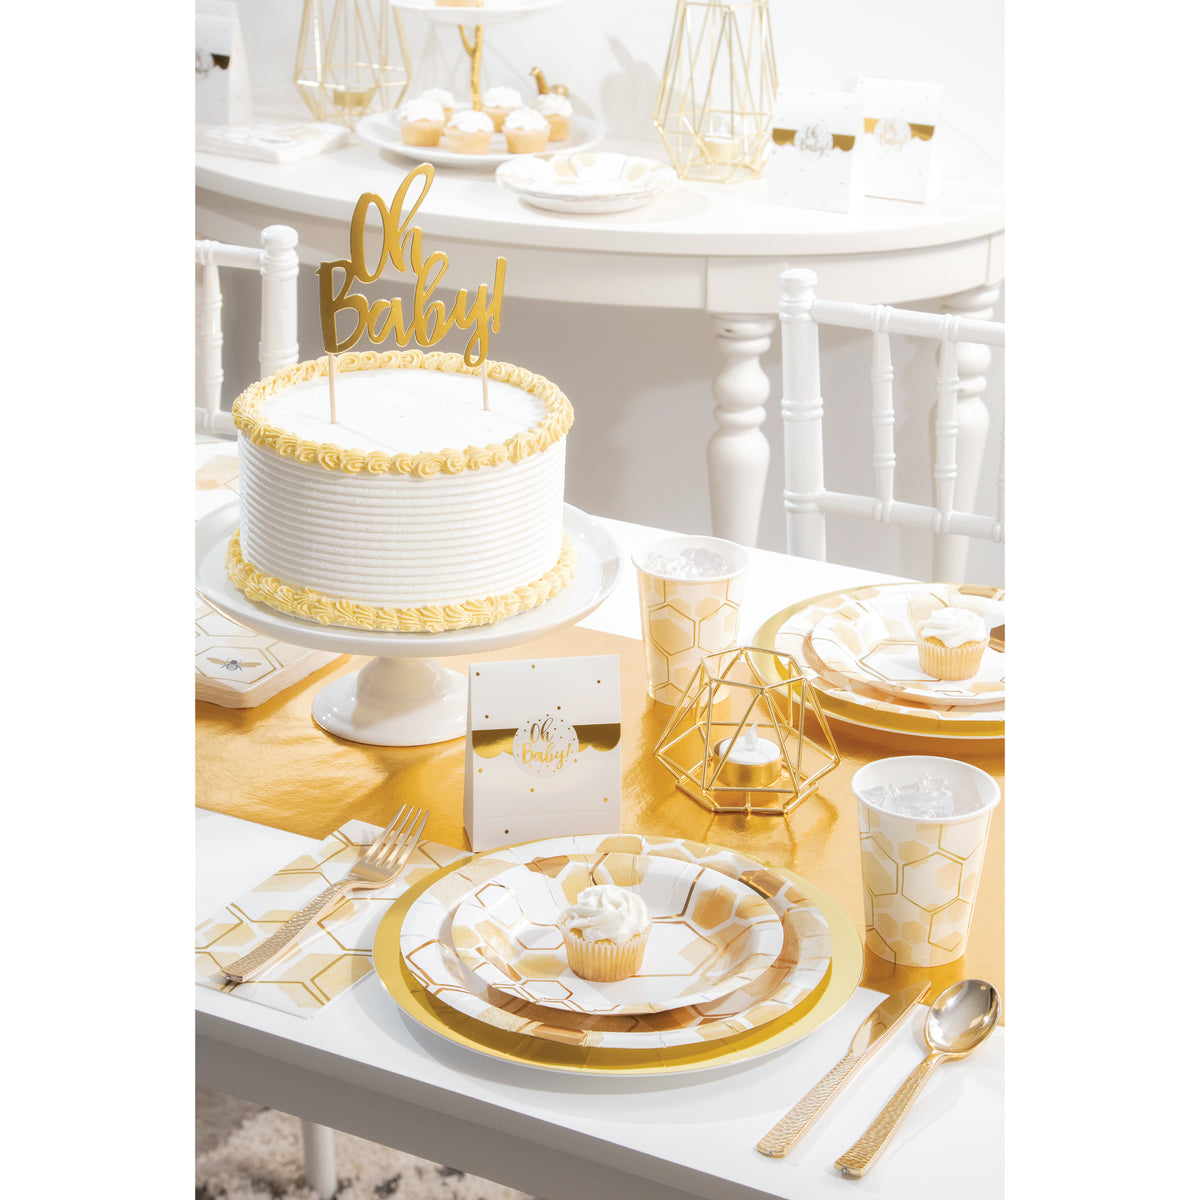 Xigejob Bee Party Decorations Tableware - Bumble Bee Baby Shower Birthday  Party Supplies Include Plates, Cups, Napkins, Tablecloth, Cutlery, Straw